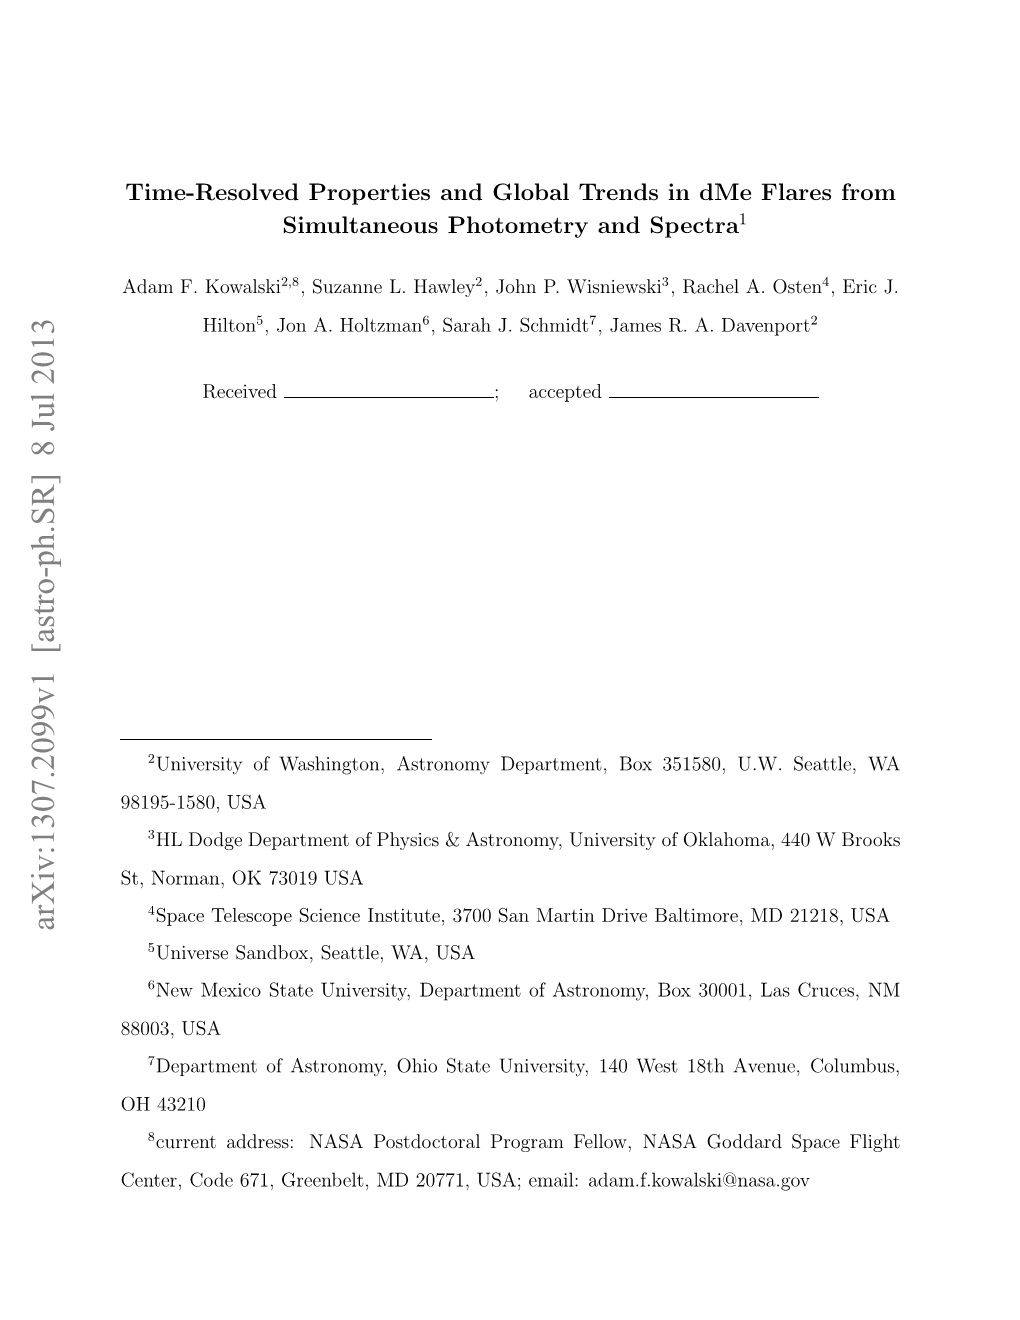 Time-Resolved Properties and Global Trends in Dme Flares From